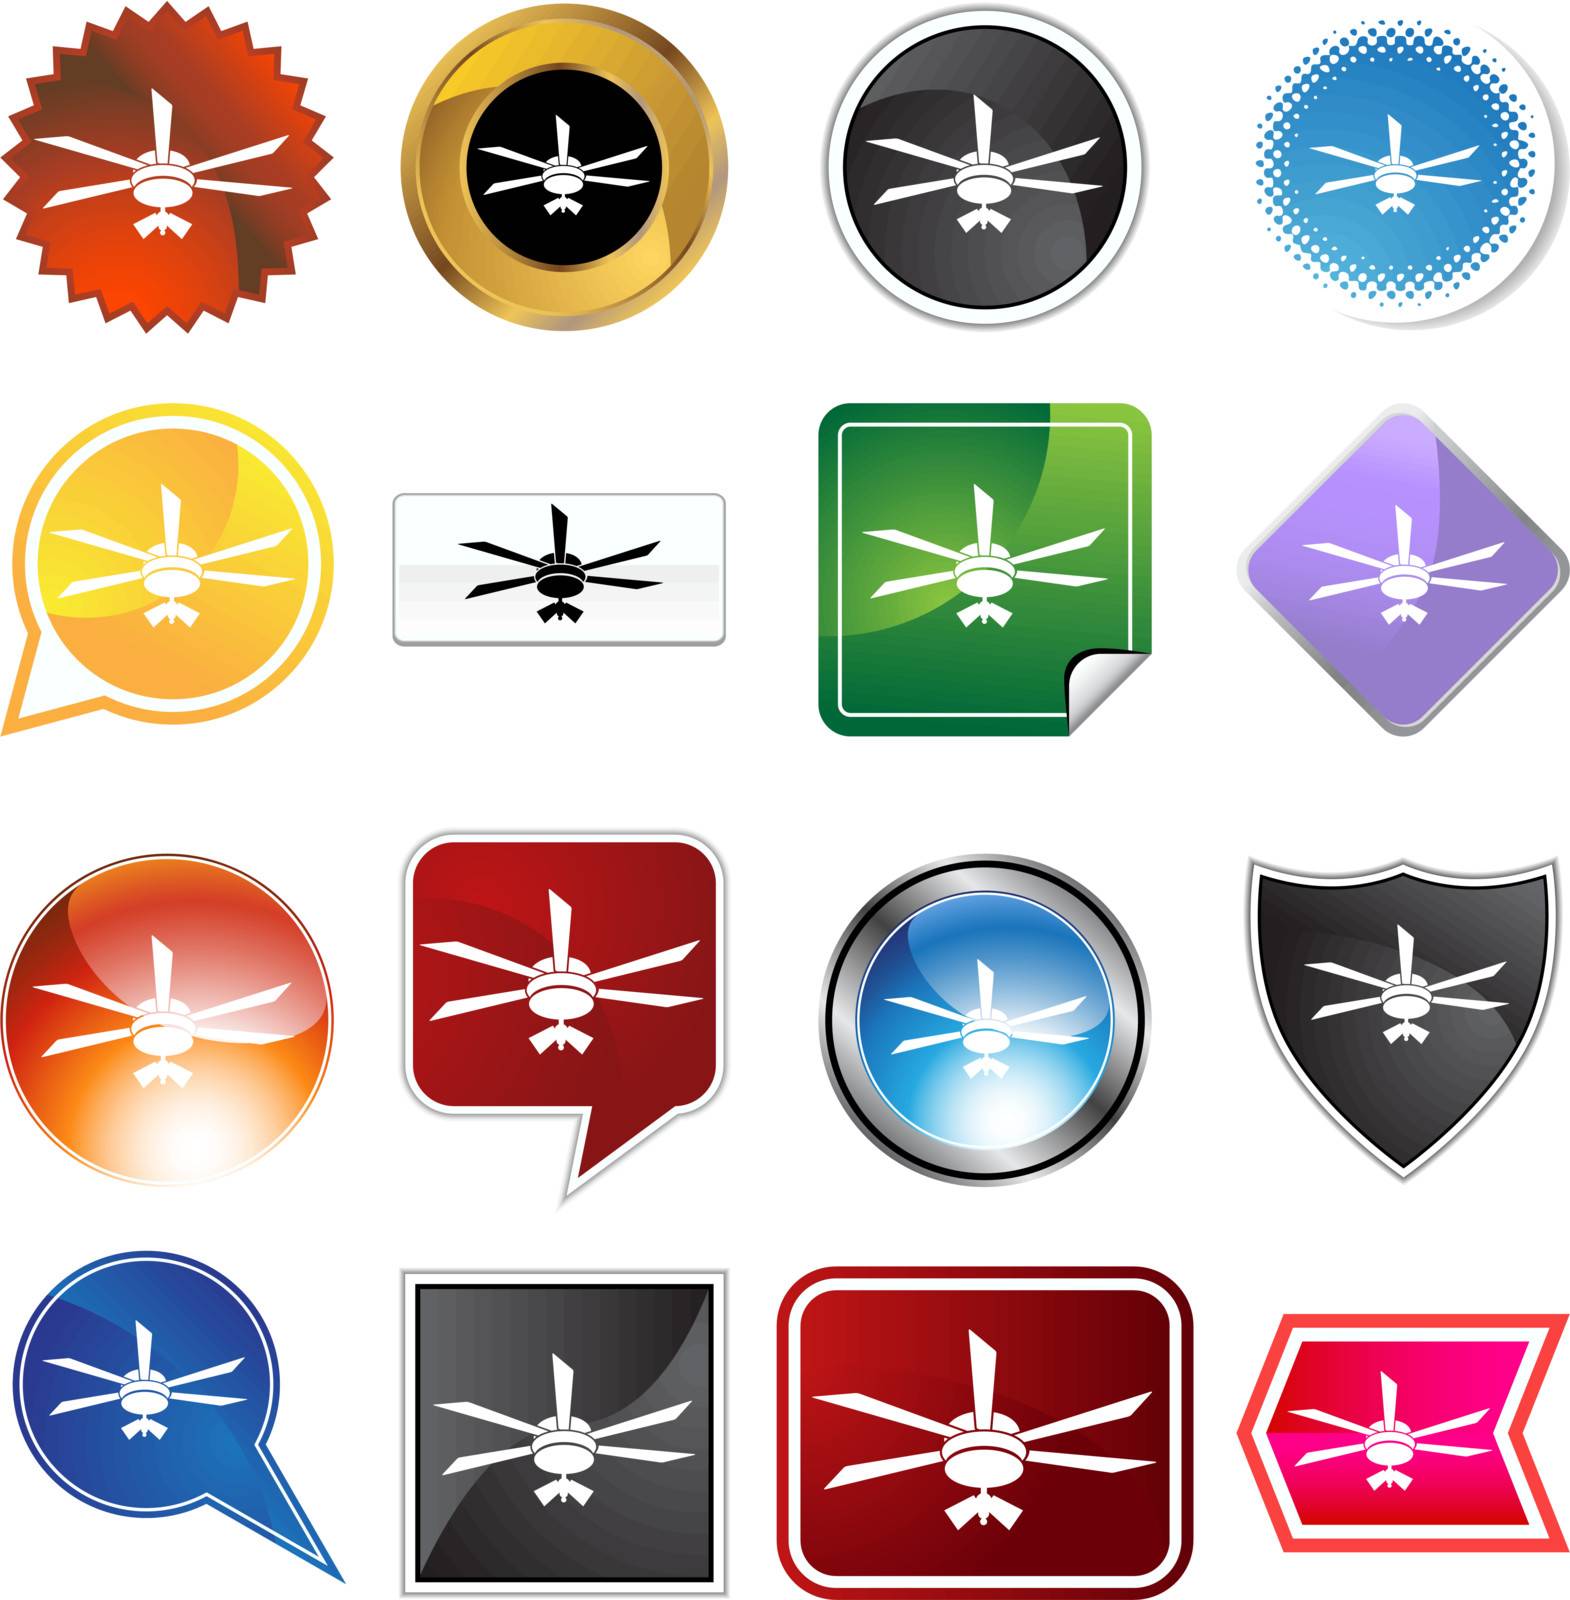 Celing fan icon set isolated on a white background.